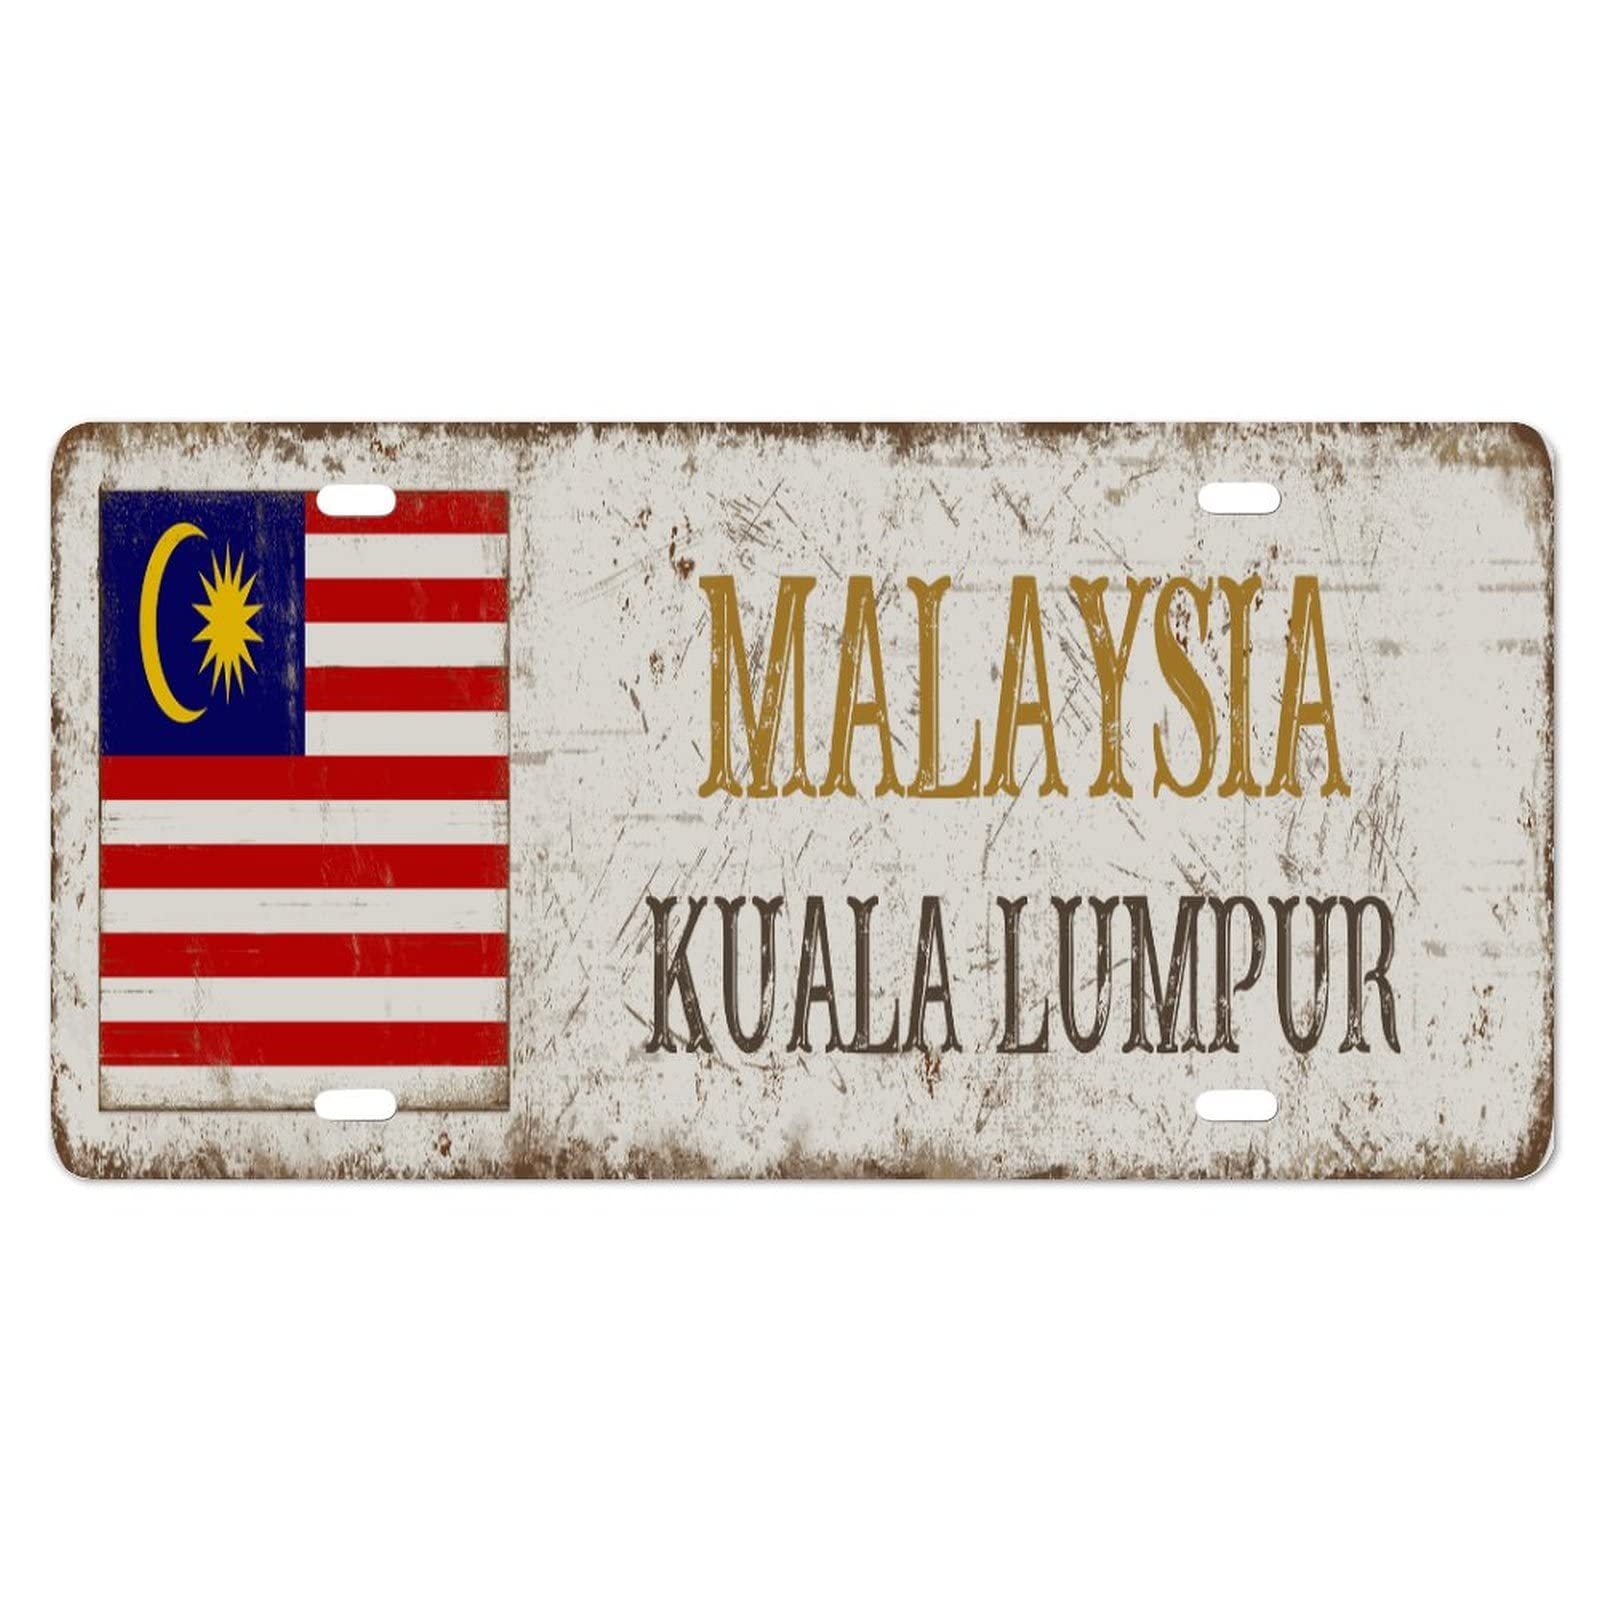 Yelolyio MalaysiaLicense Plate for Front of Car Size 6x12 Inch Rust-Free Malaysia Kuala Lumpur Metal License Plate Malaysia National Flag Aluminum Novelty License Plate Car Tags Gift for New Car von Yelolyio